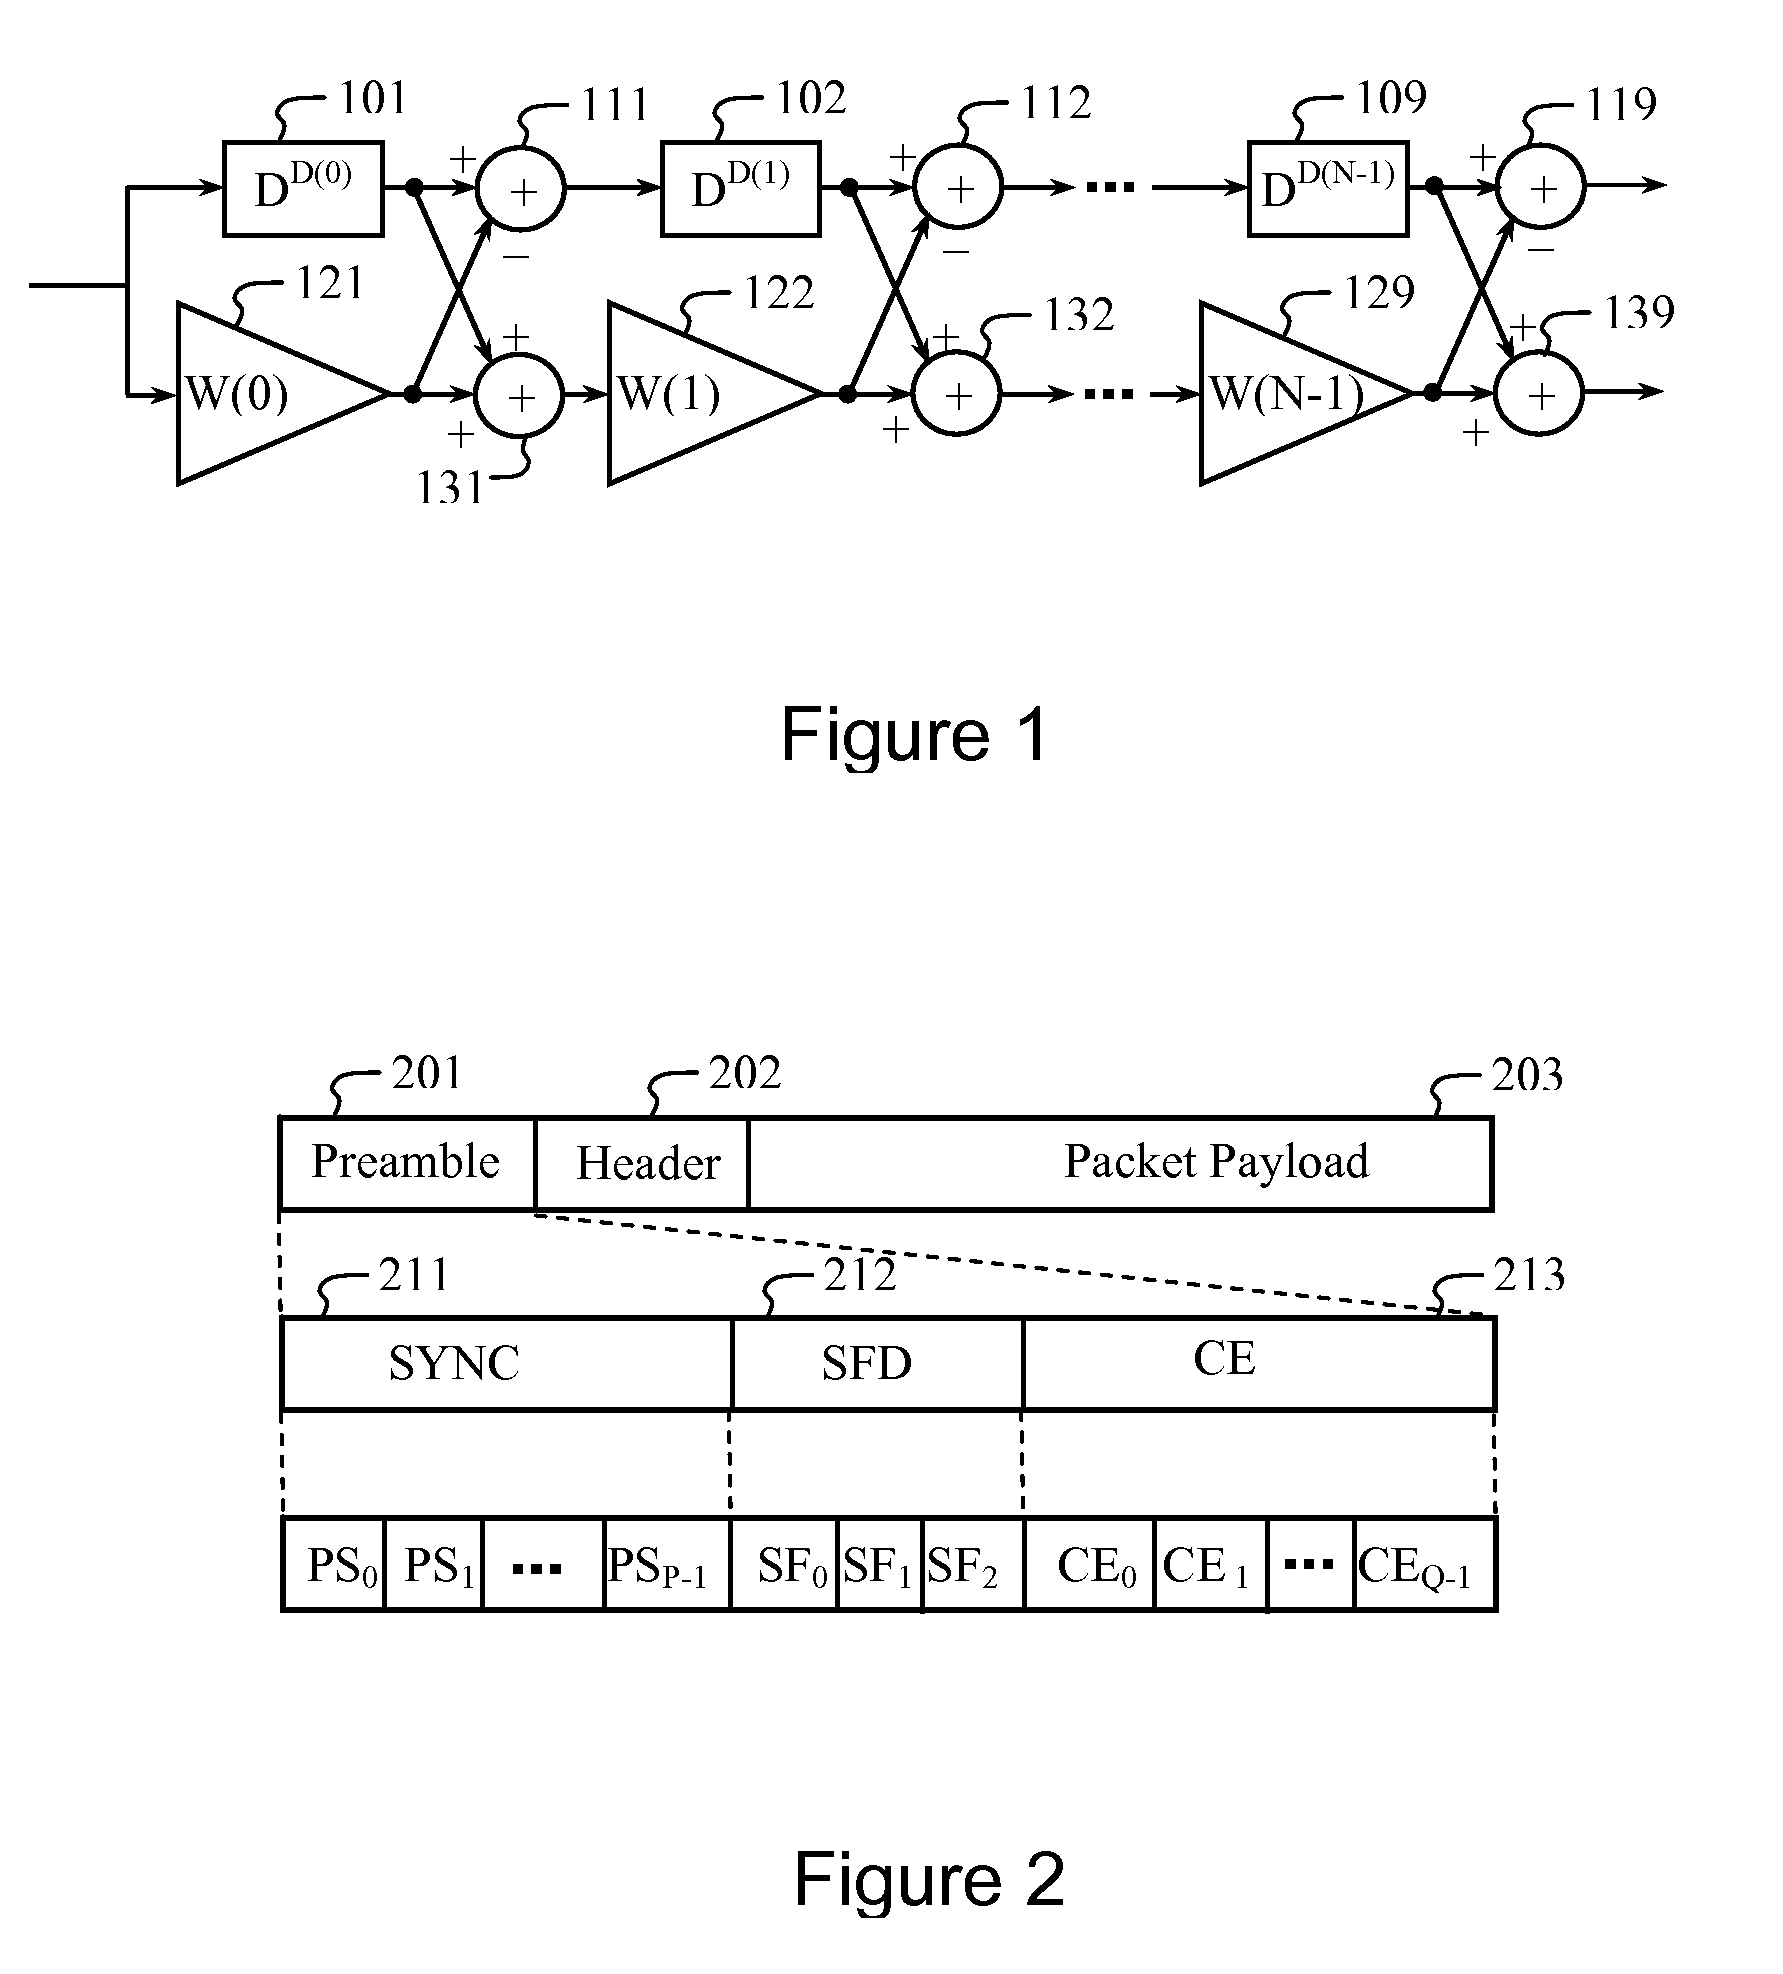 Common Air Interface Supporting Single Carrier and OFDM